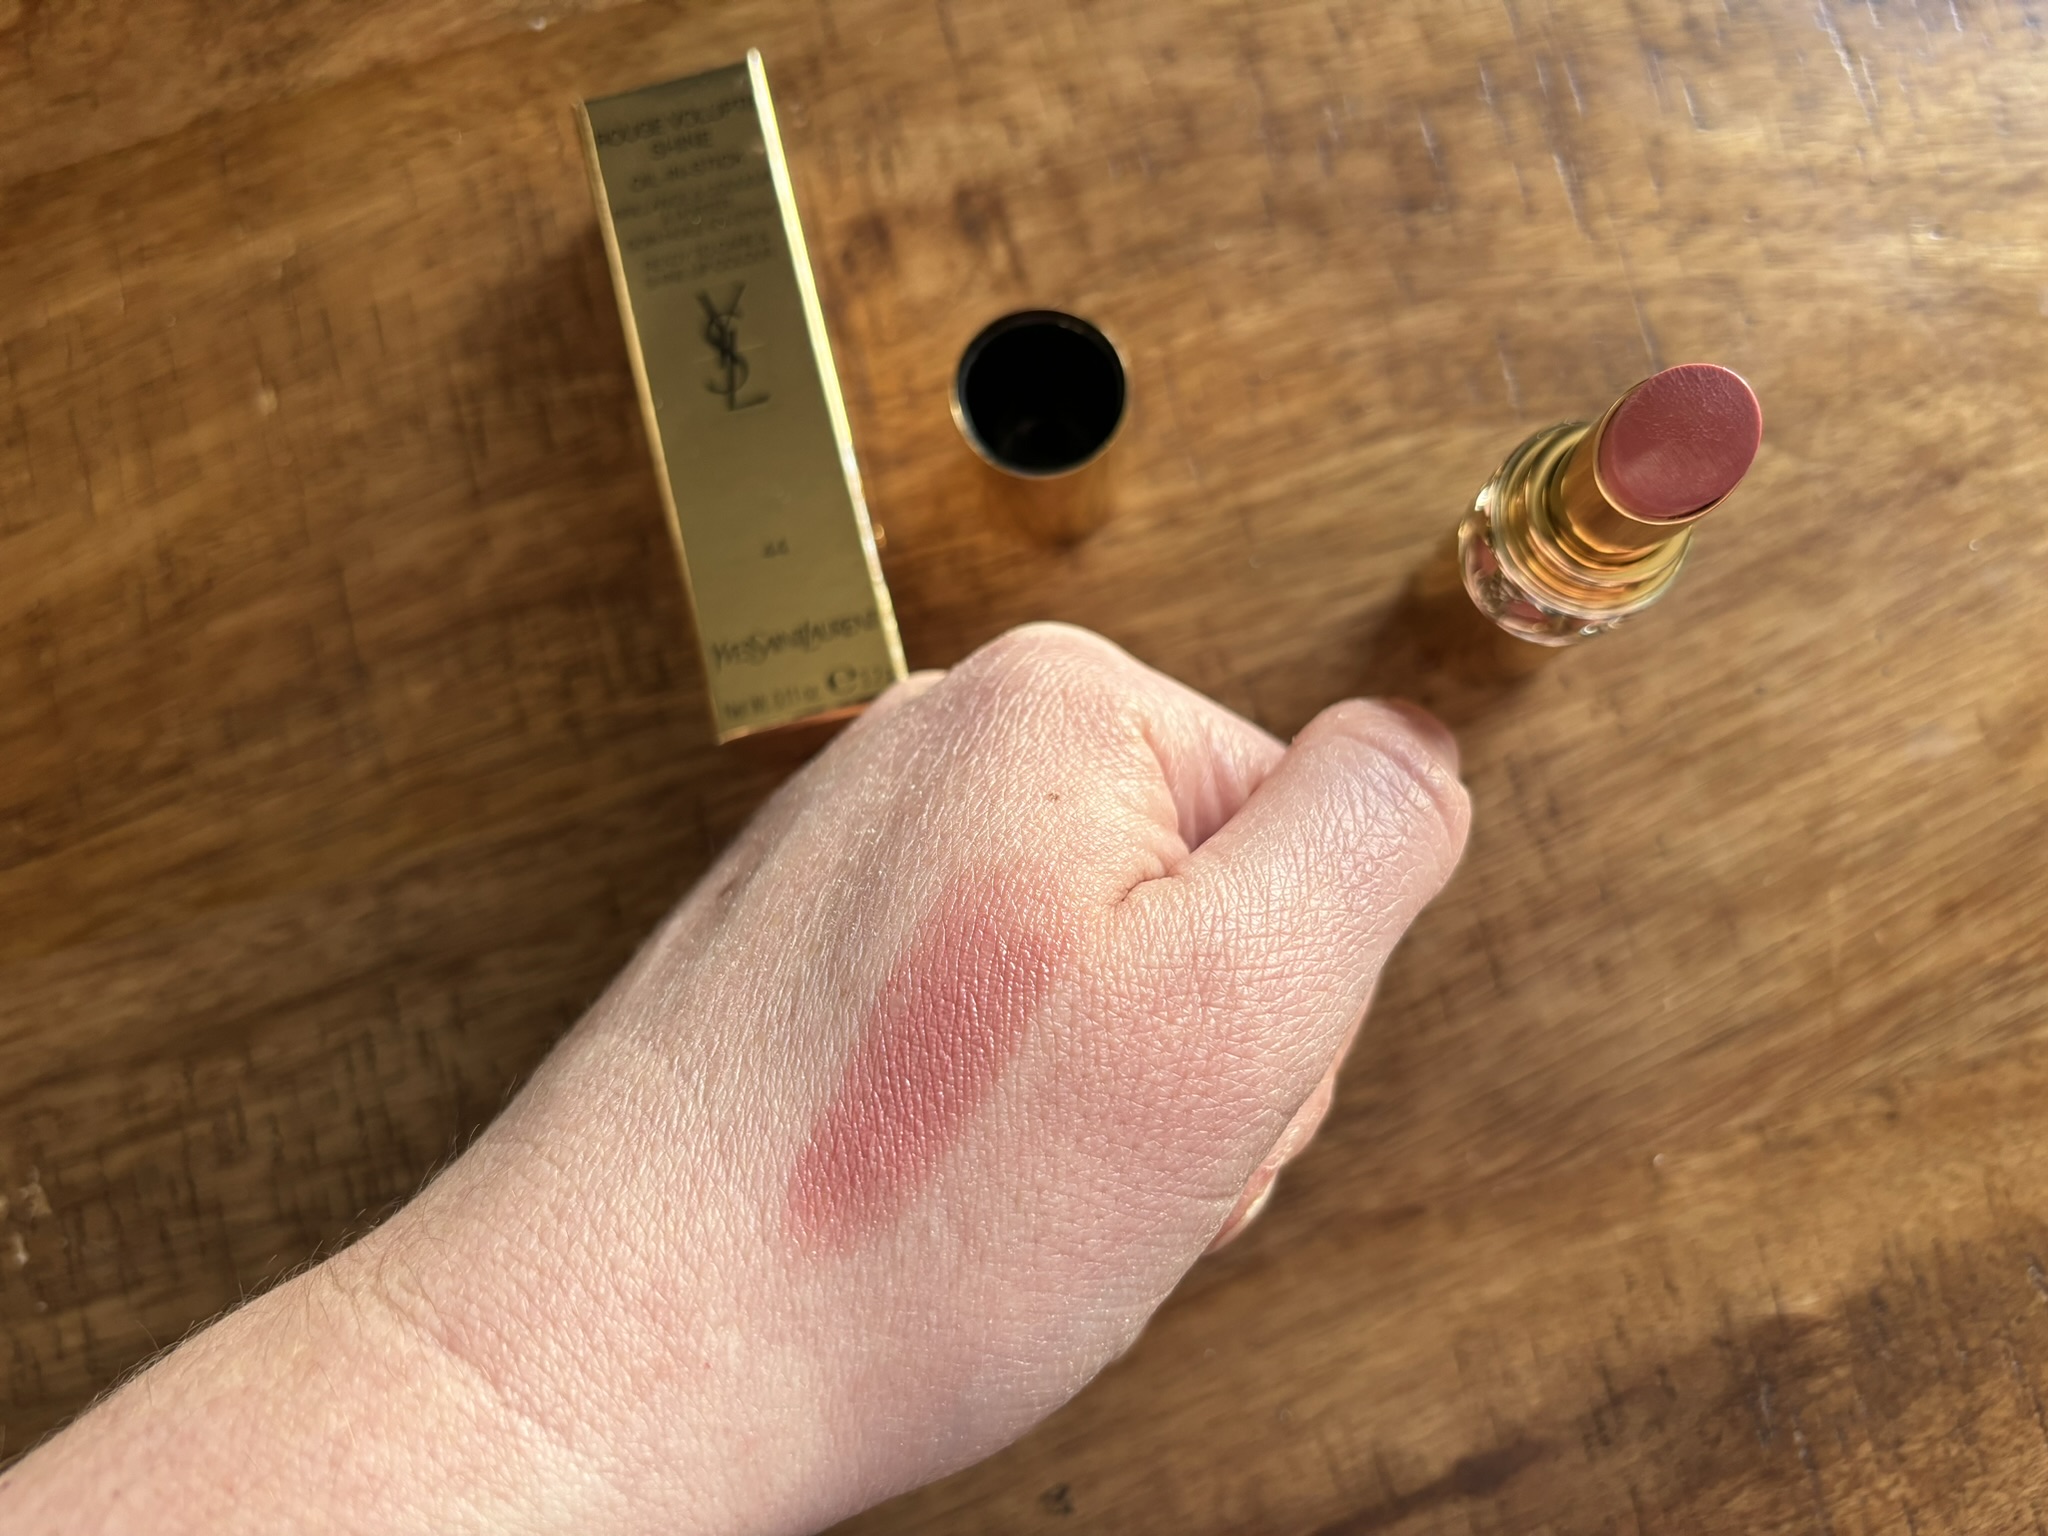 Yves Saint Laurent lipstick in Nude Lavalliere shade swatched on a hand